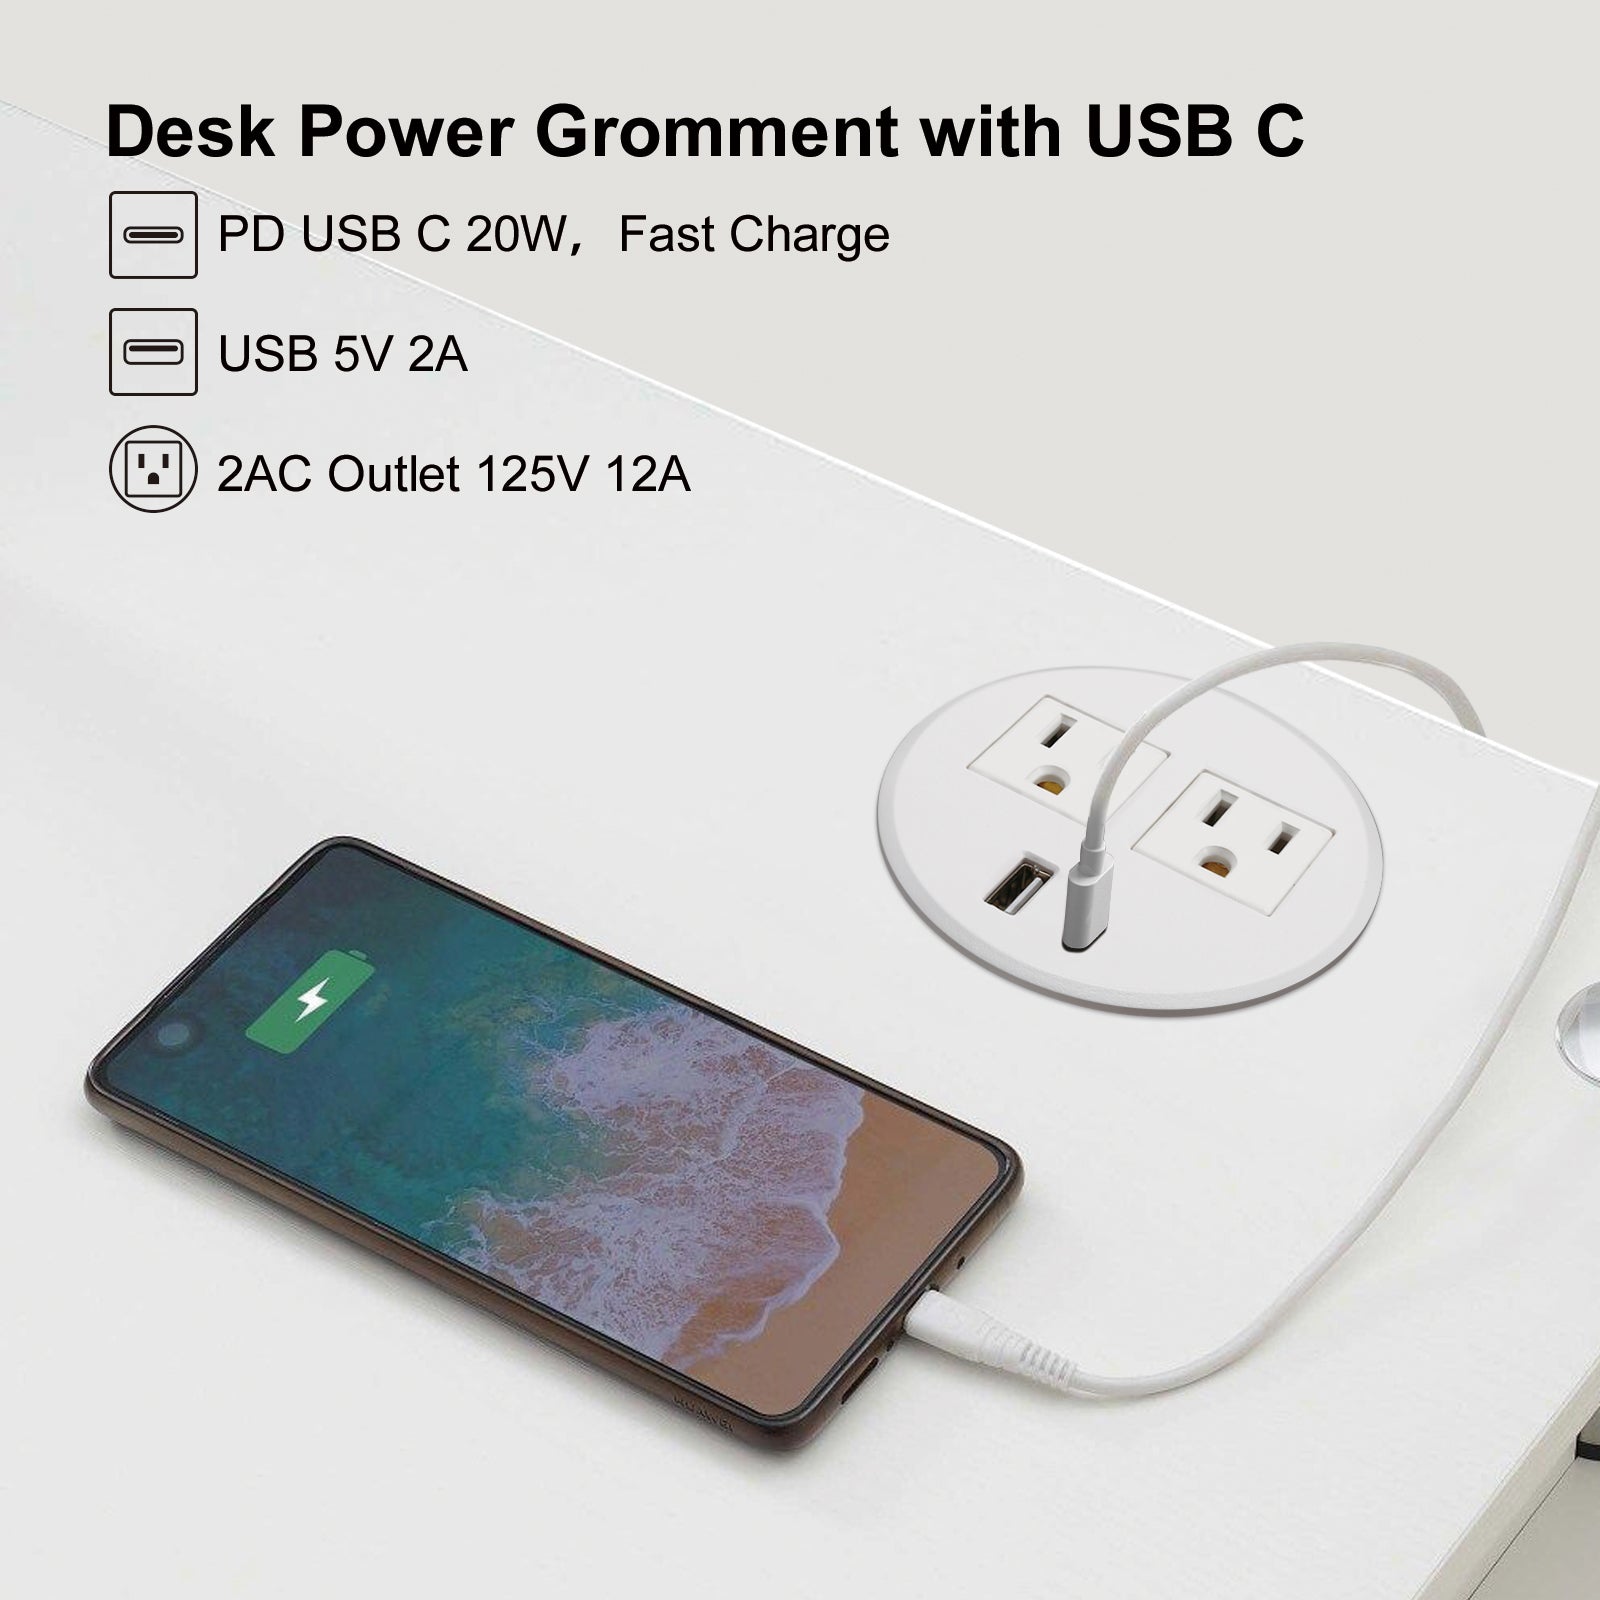 Power Grommet USB C Ports for Desk,20W PD Fast Charge Desktop Power Bar Flat Plug Extension Power Cord 2 AC Outlets Built in Counter Conference Table